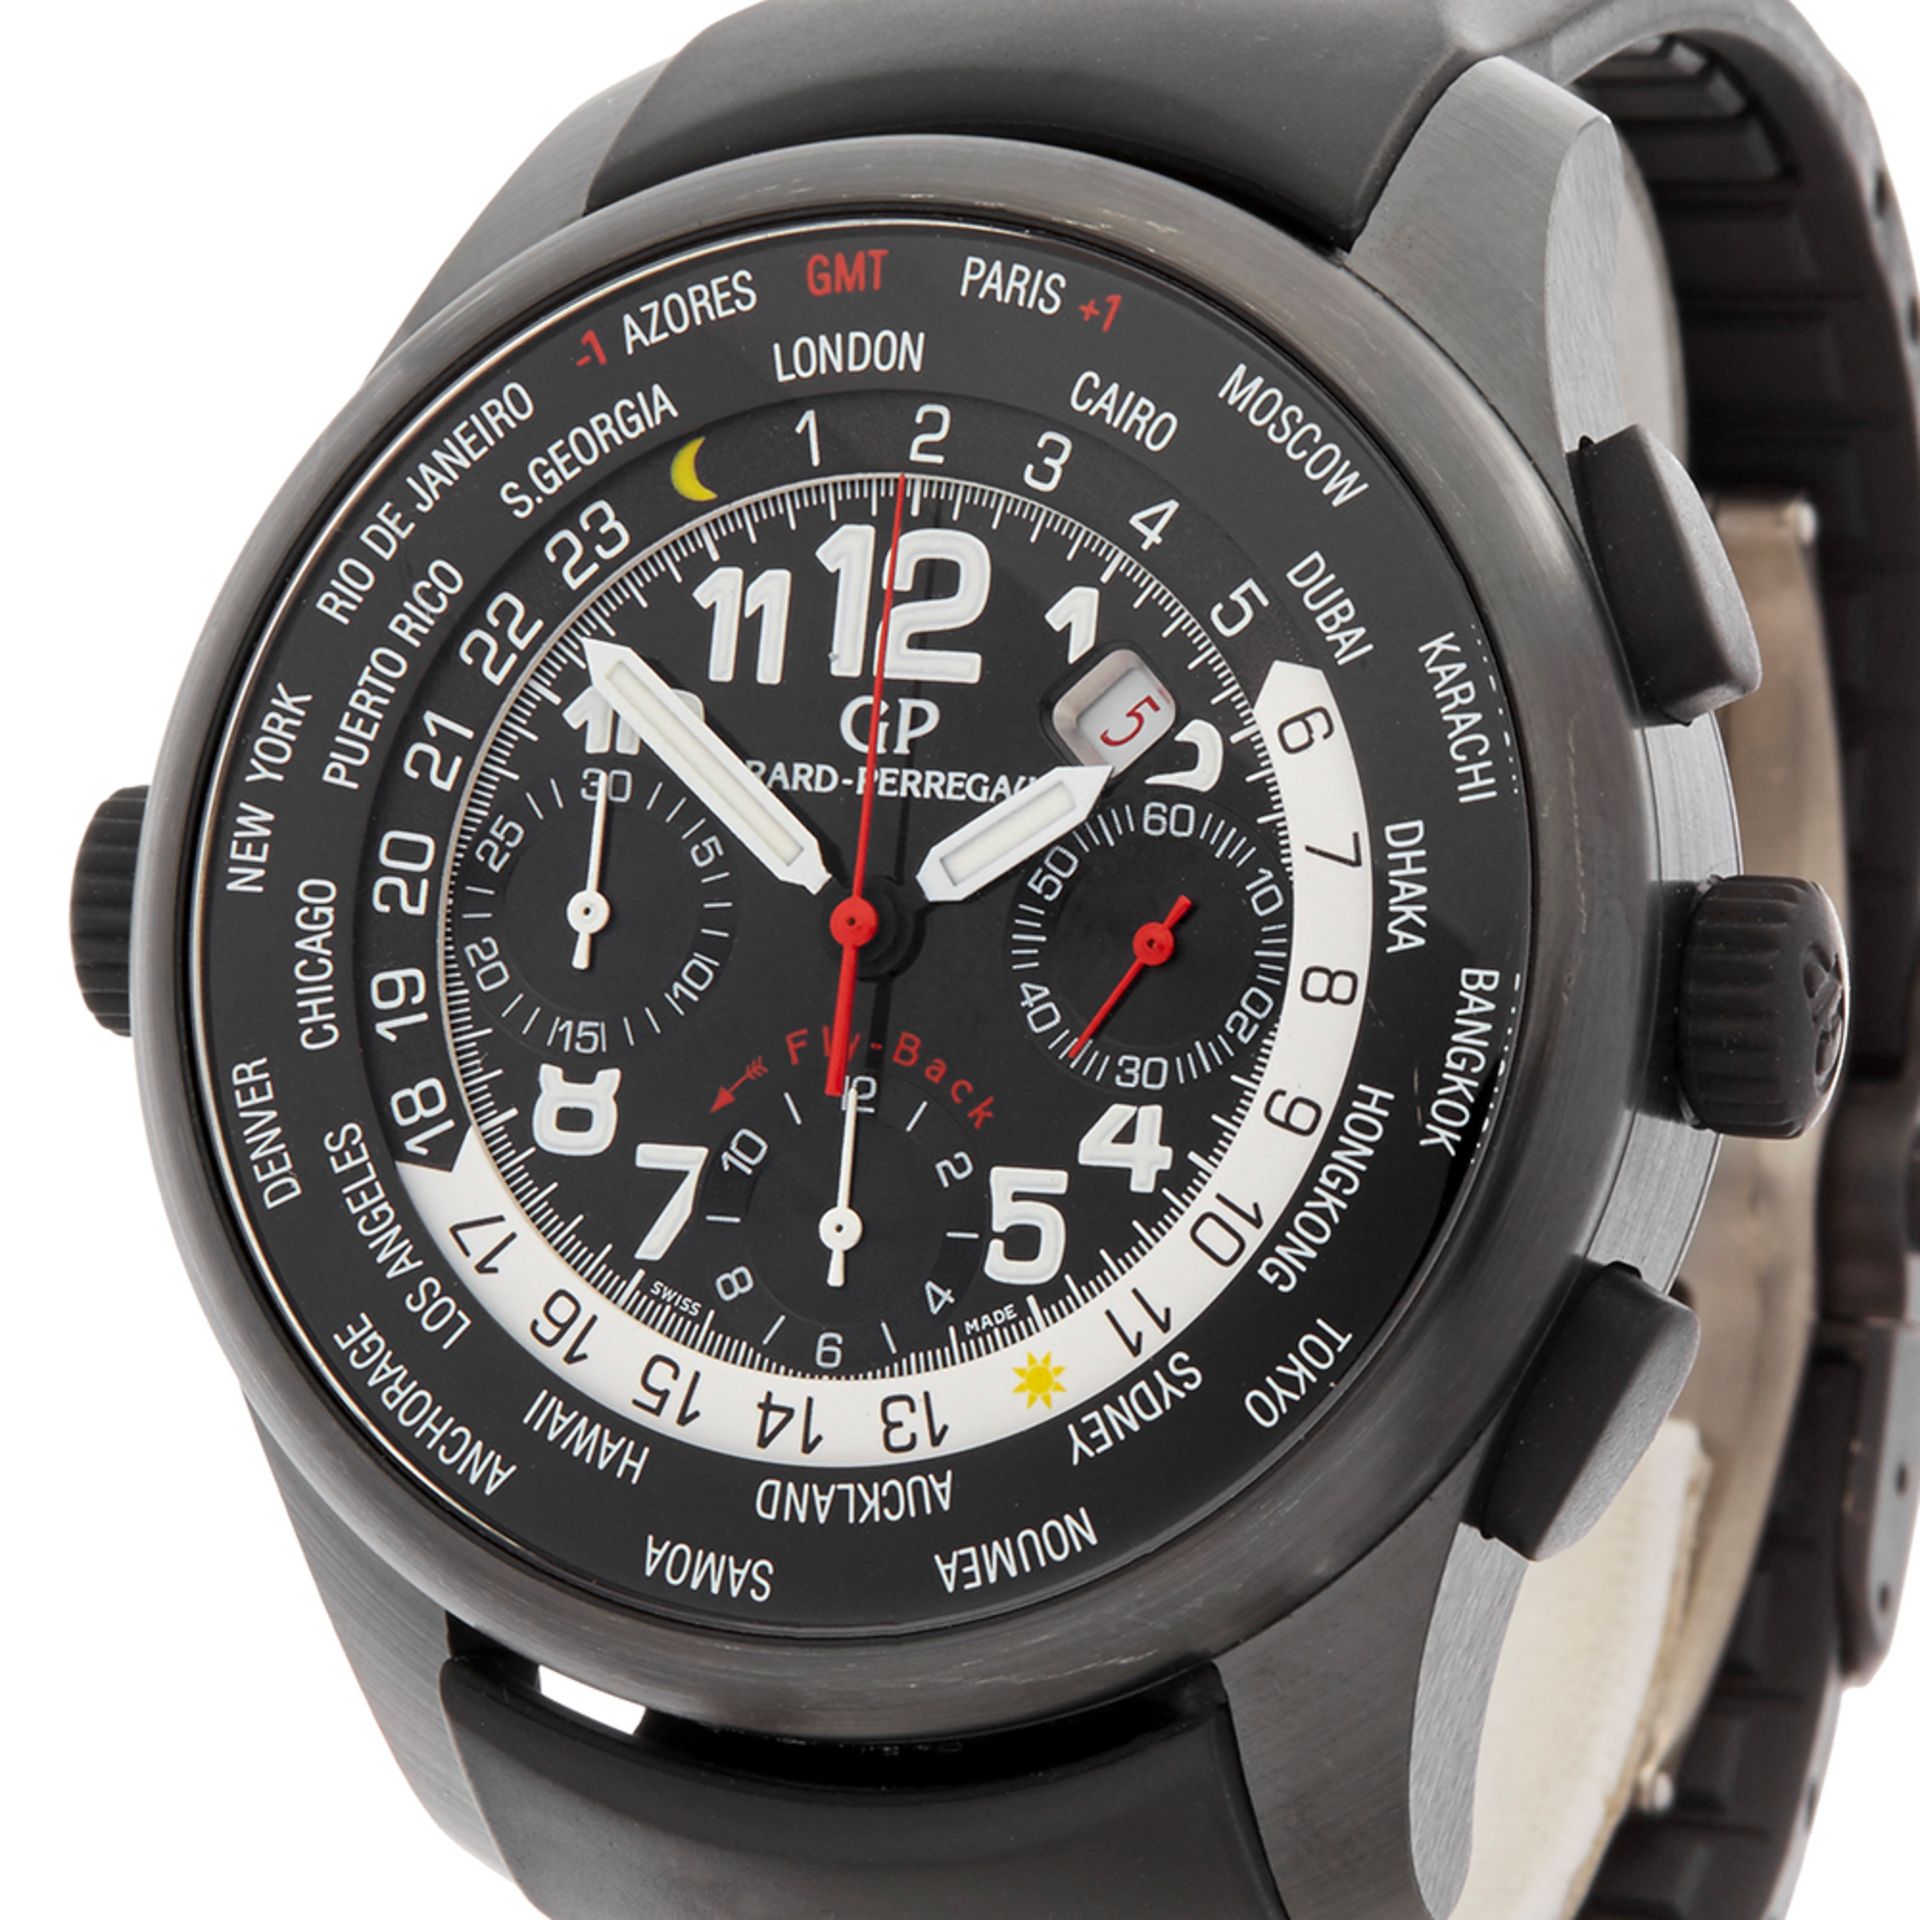 Girard Perregaux WW.TC Shadow Flyback Chronograph 43mm Black DLC Coated Stainless Steel